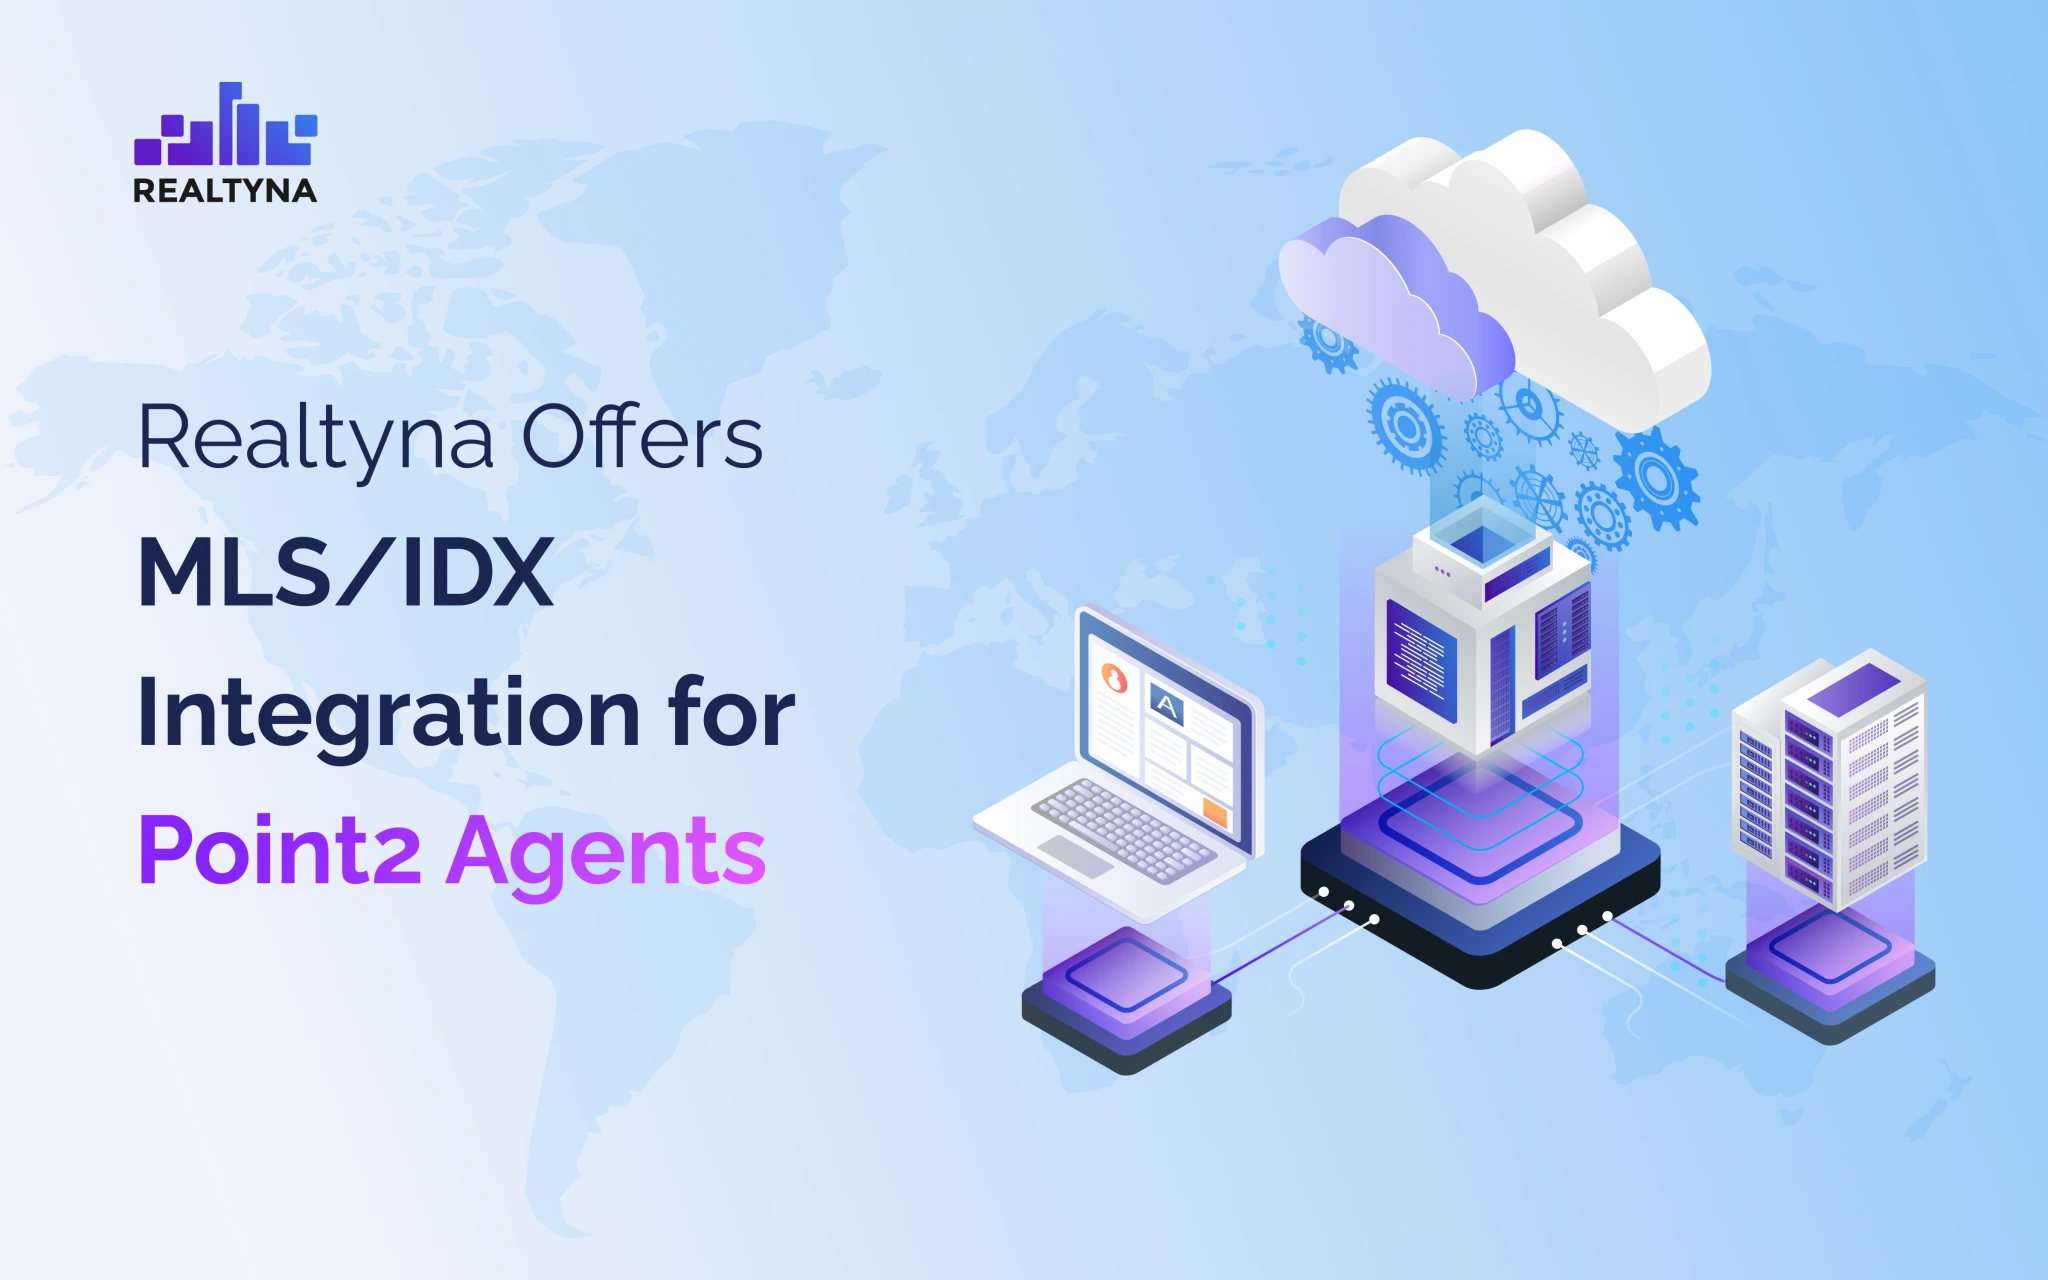 Realtyna Offers MLS/IDX Integration for Point2 Agents